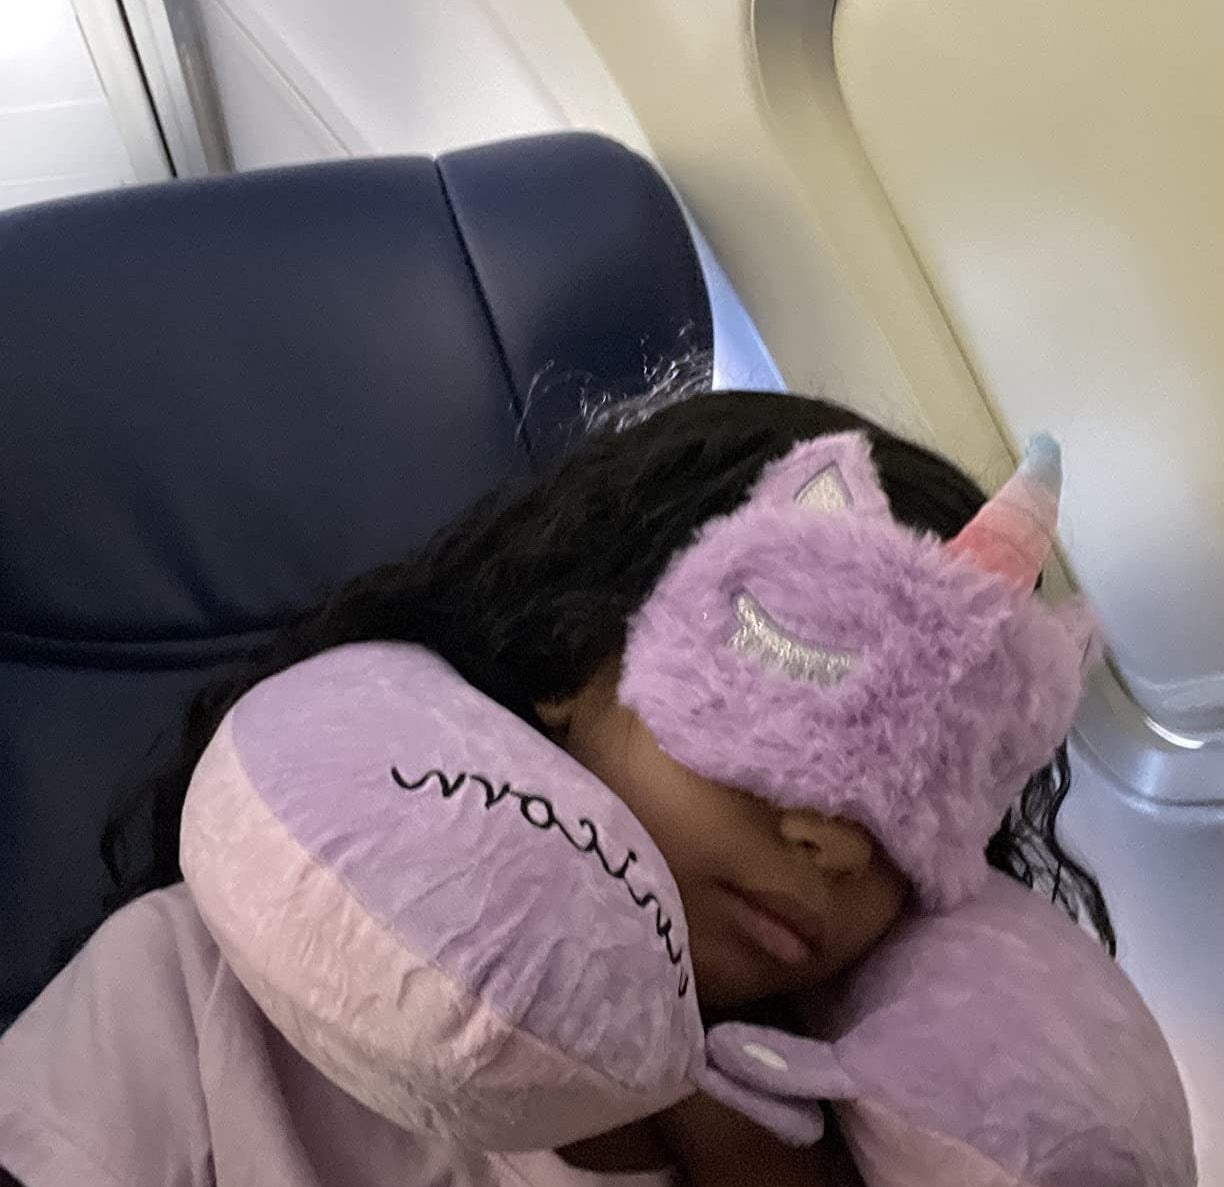 a child sleeping with the pink unicorn-themed neck pillow and mask on plane